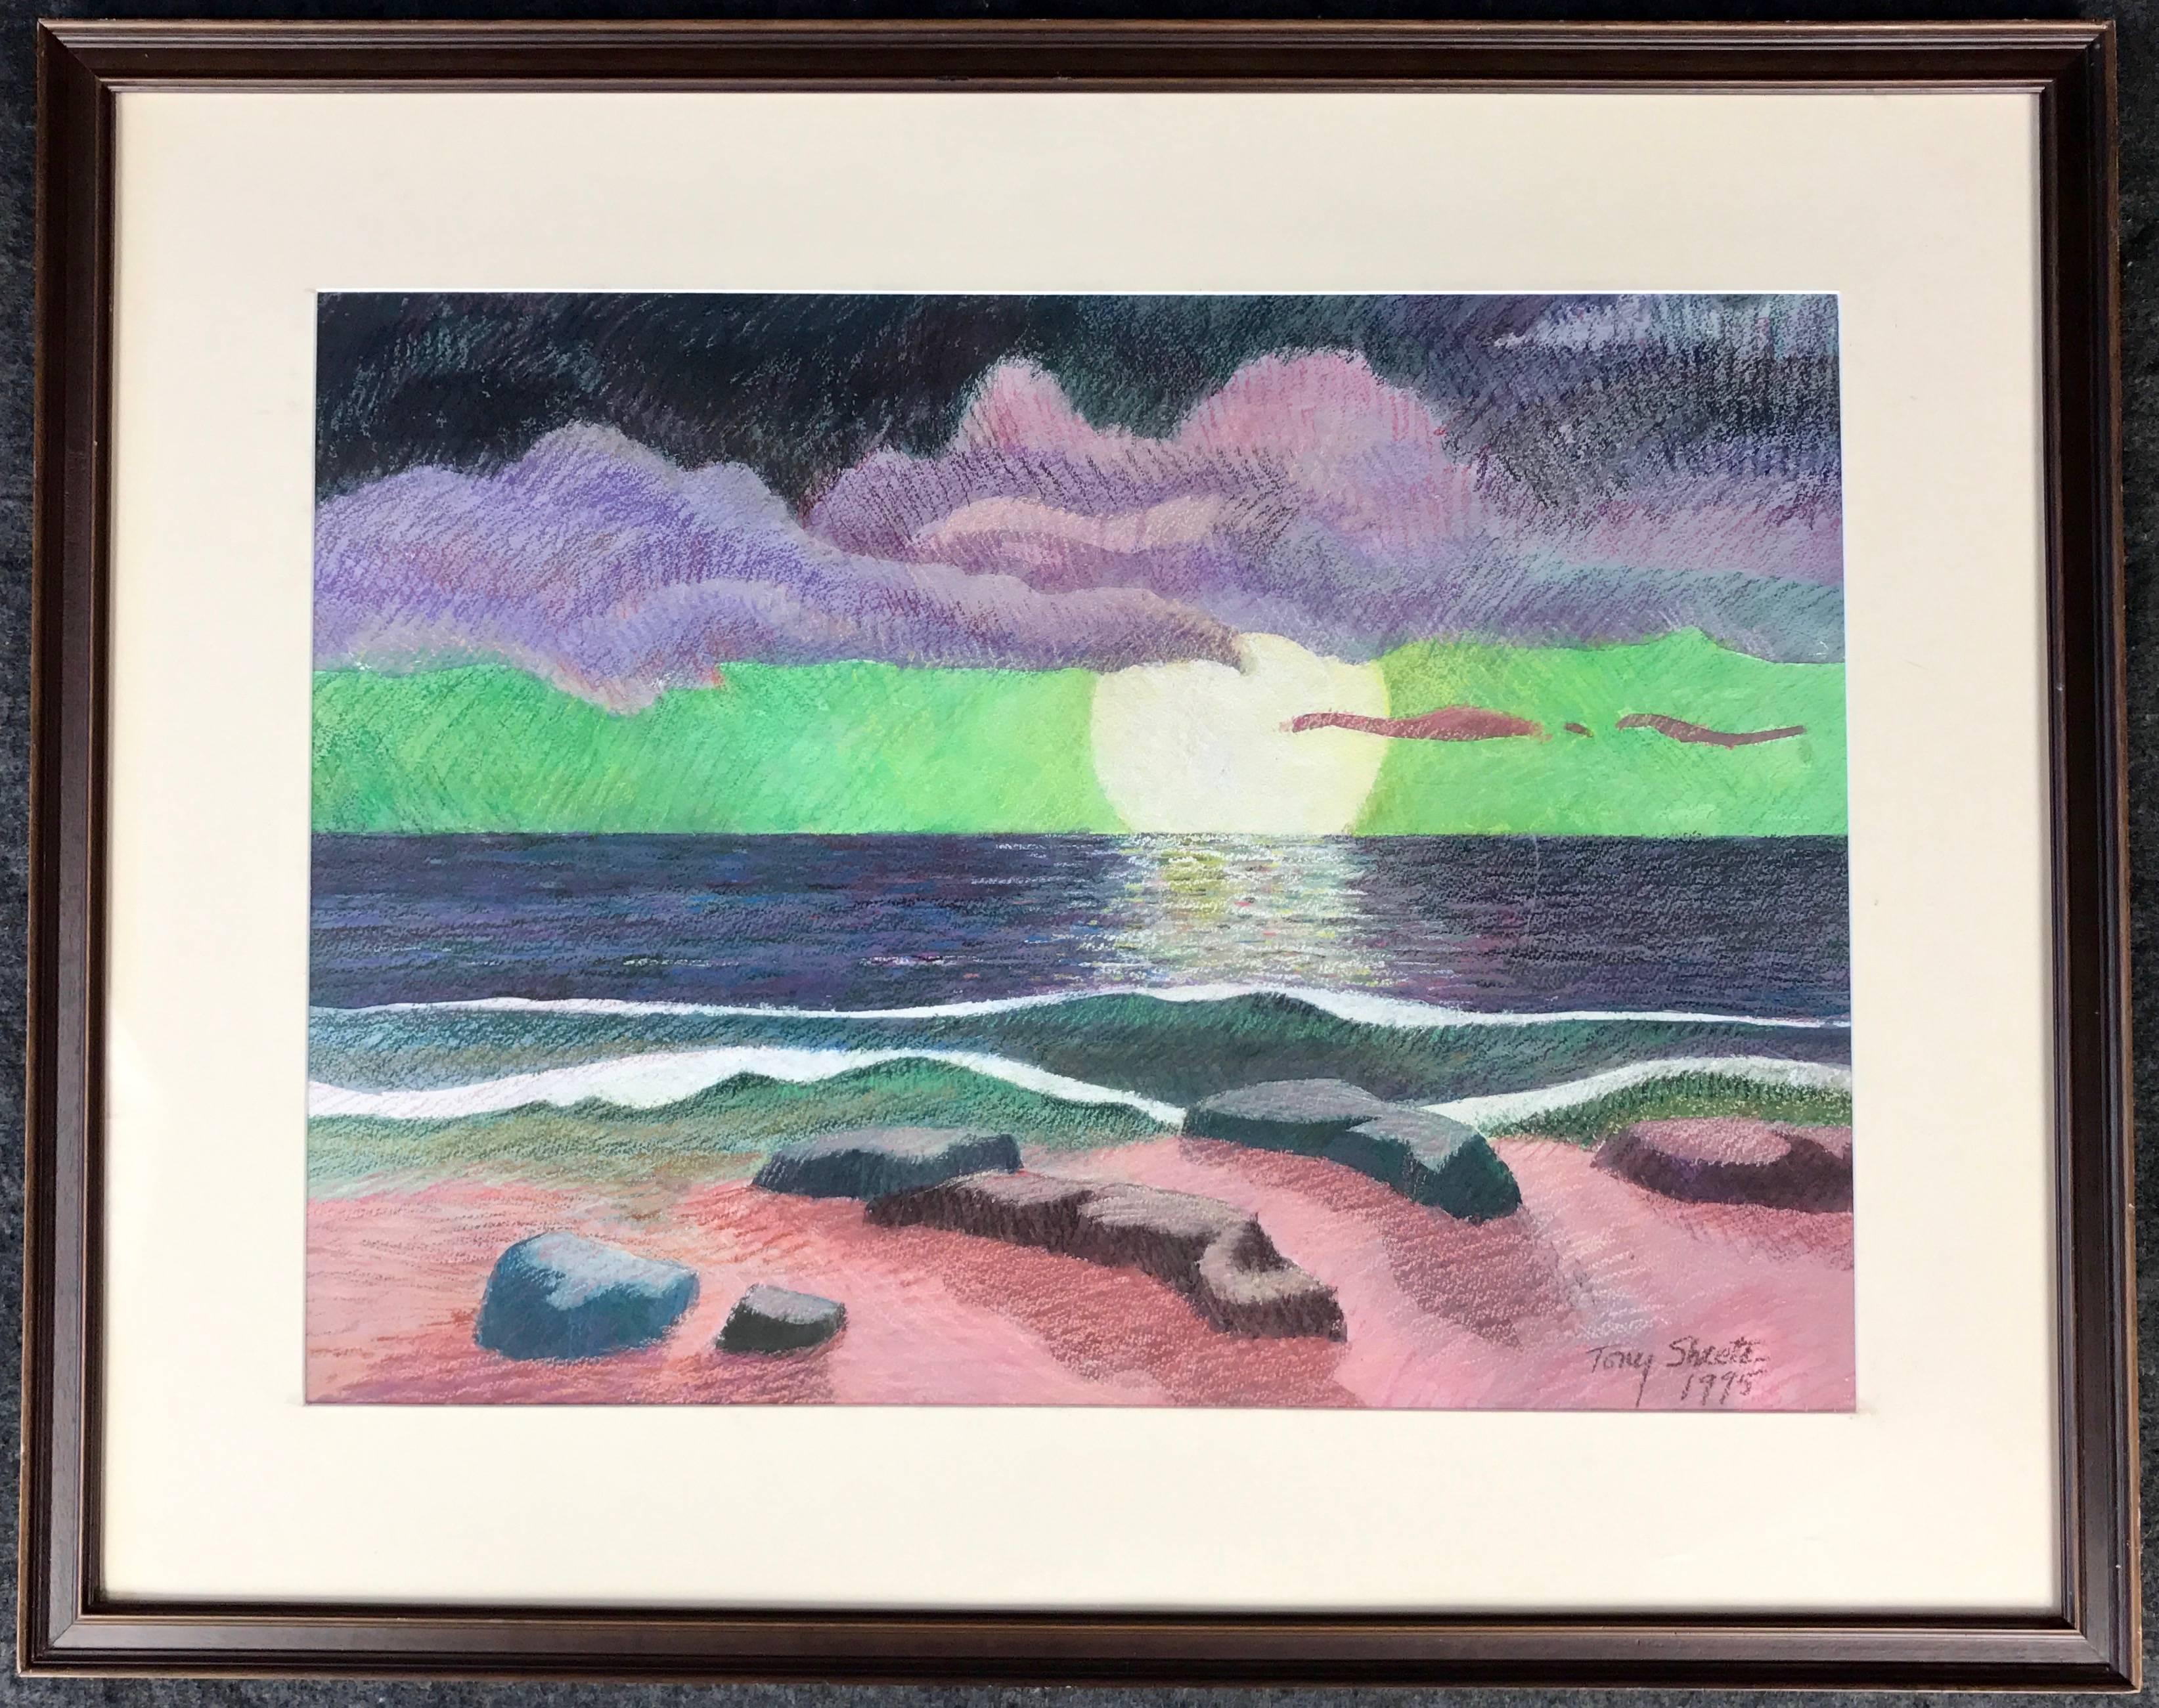 A pastel over watercolor impressionist ocean landscape titled “Molokai Dream” by American artist John Anthony “Tony” Sheets (b. 1942).

Cool pastels, crosshatched and layered in deceptively complex interplay over a watercolor base, depict a